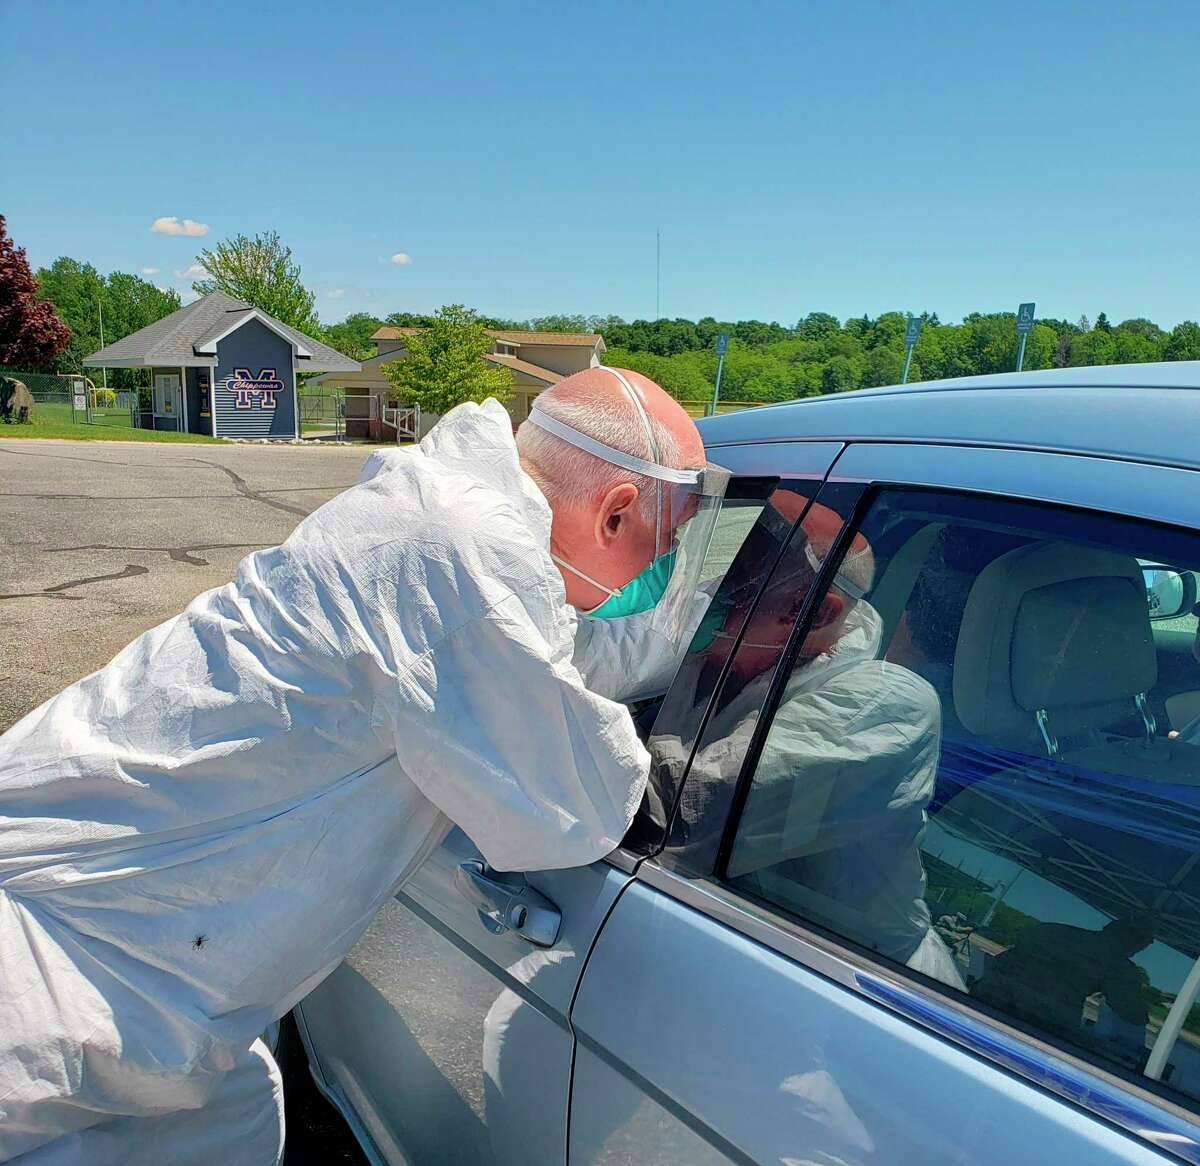 A member of the National Guard could be seen collecting a sample during the Manistee COVID-19 screening from June 25-26 at Manistee High School's parking lot. (File photo)